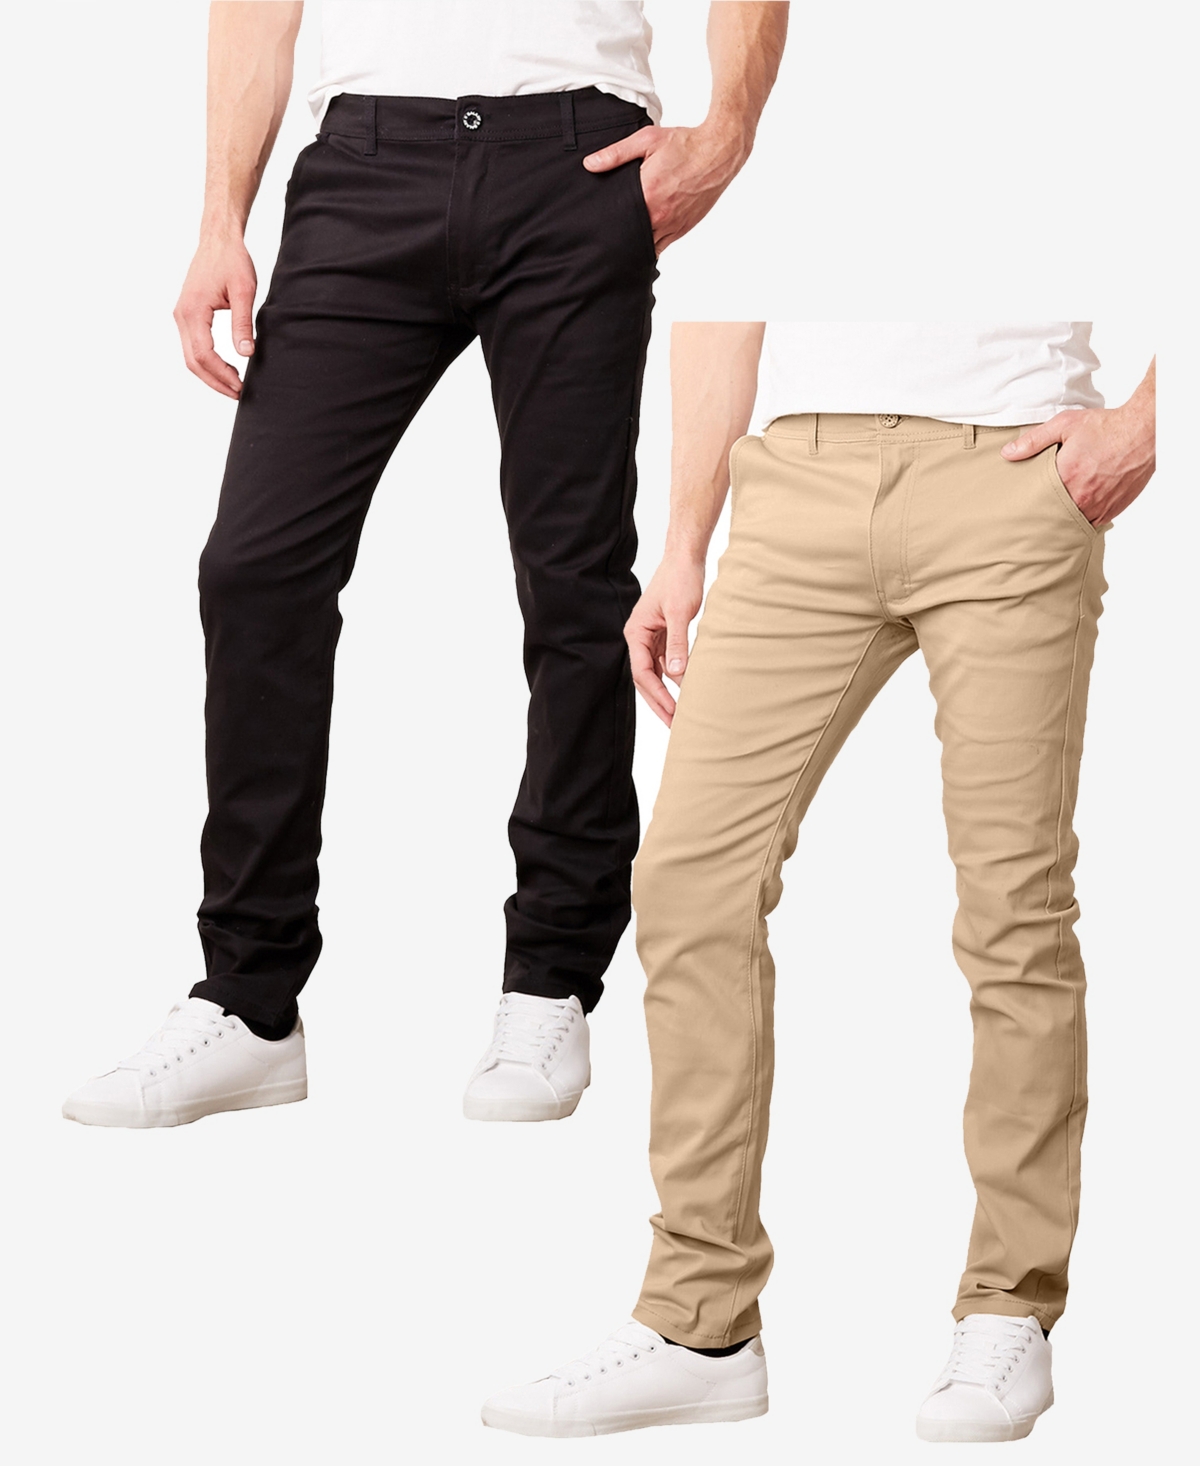 Galaxy By Harvic Men's Super Stretch Slim Fit Everyday Chino Pants, Pack Of 2 In Black Khaki